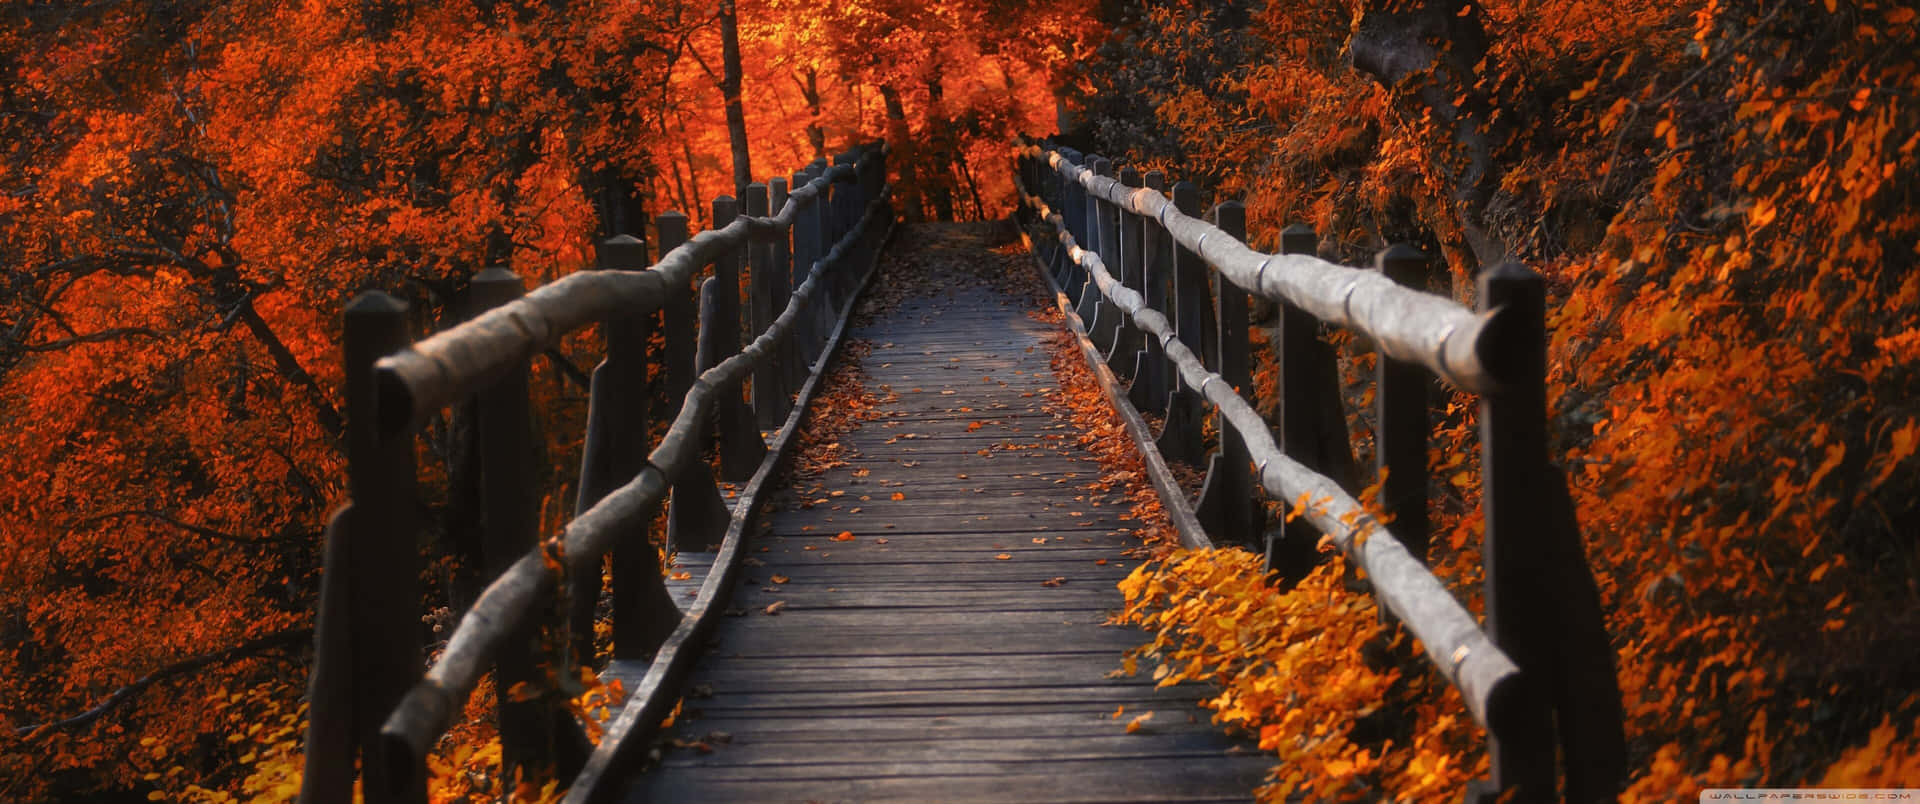 Enjoy the beauty of nature in fall! Wallpaper